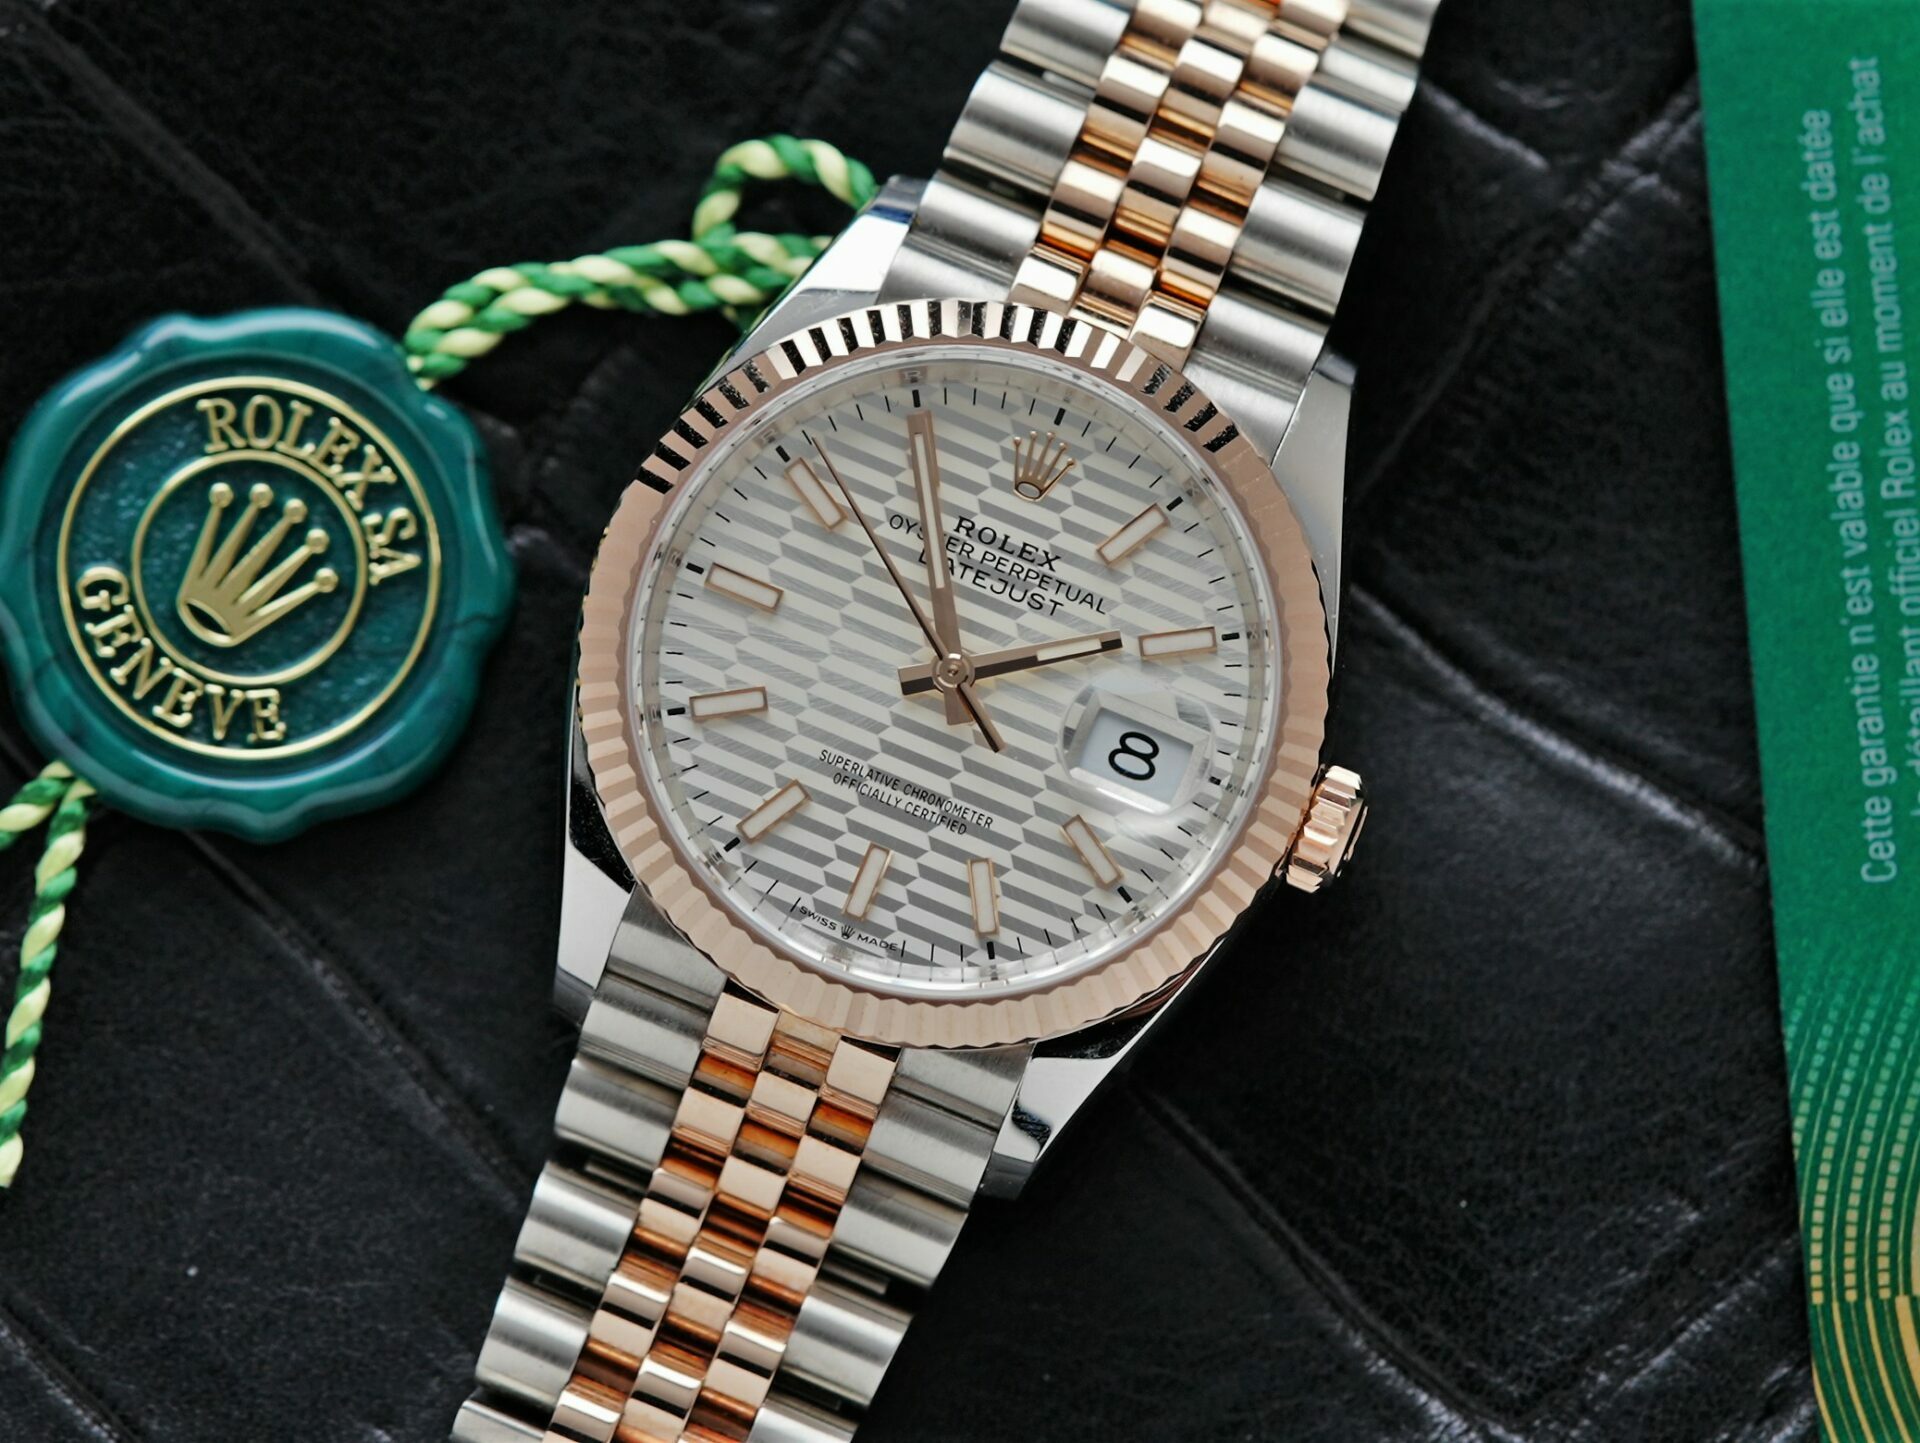 Rolex Datejust 36 Motif Rose Gold 2022 watch with card and tag.